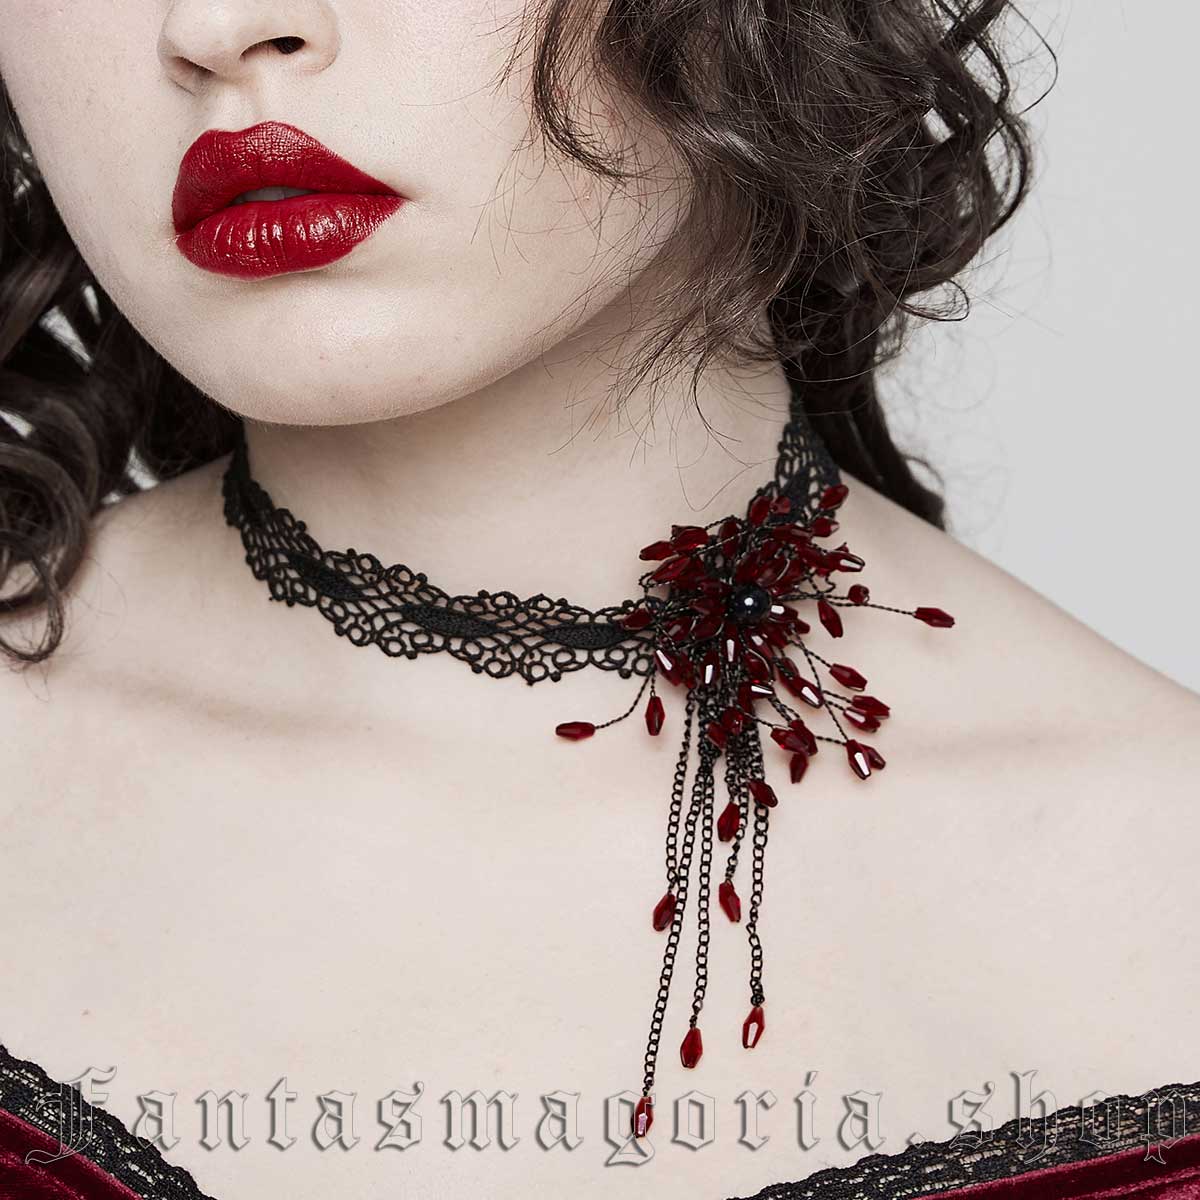 Women's Gothic black lace and red beads choker necklace. - Punk Rave - DS-572/BK-RD